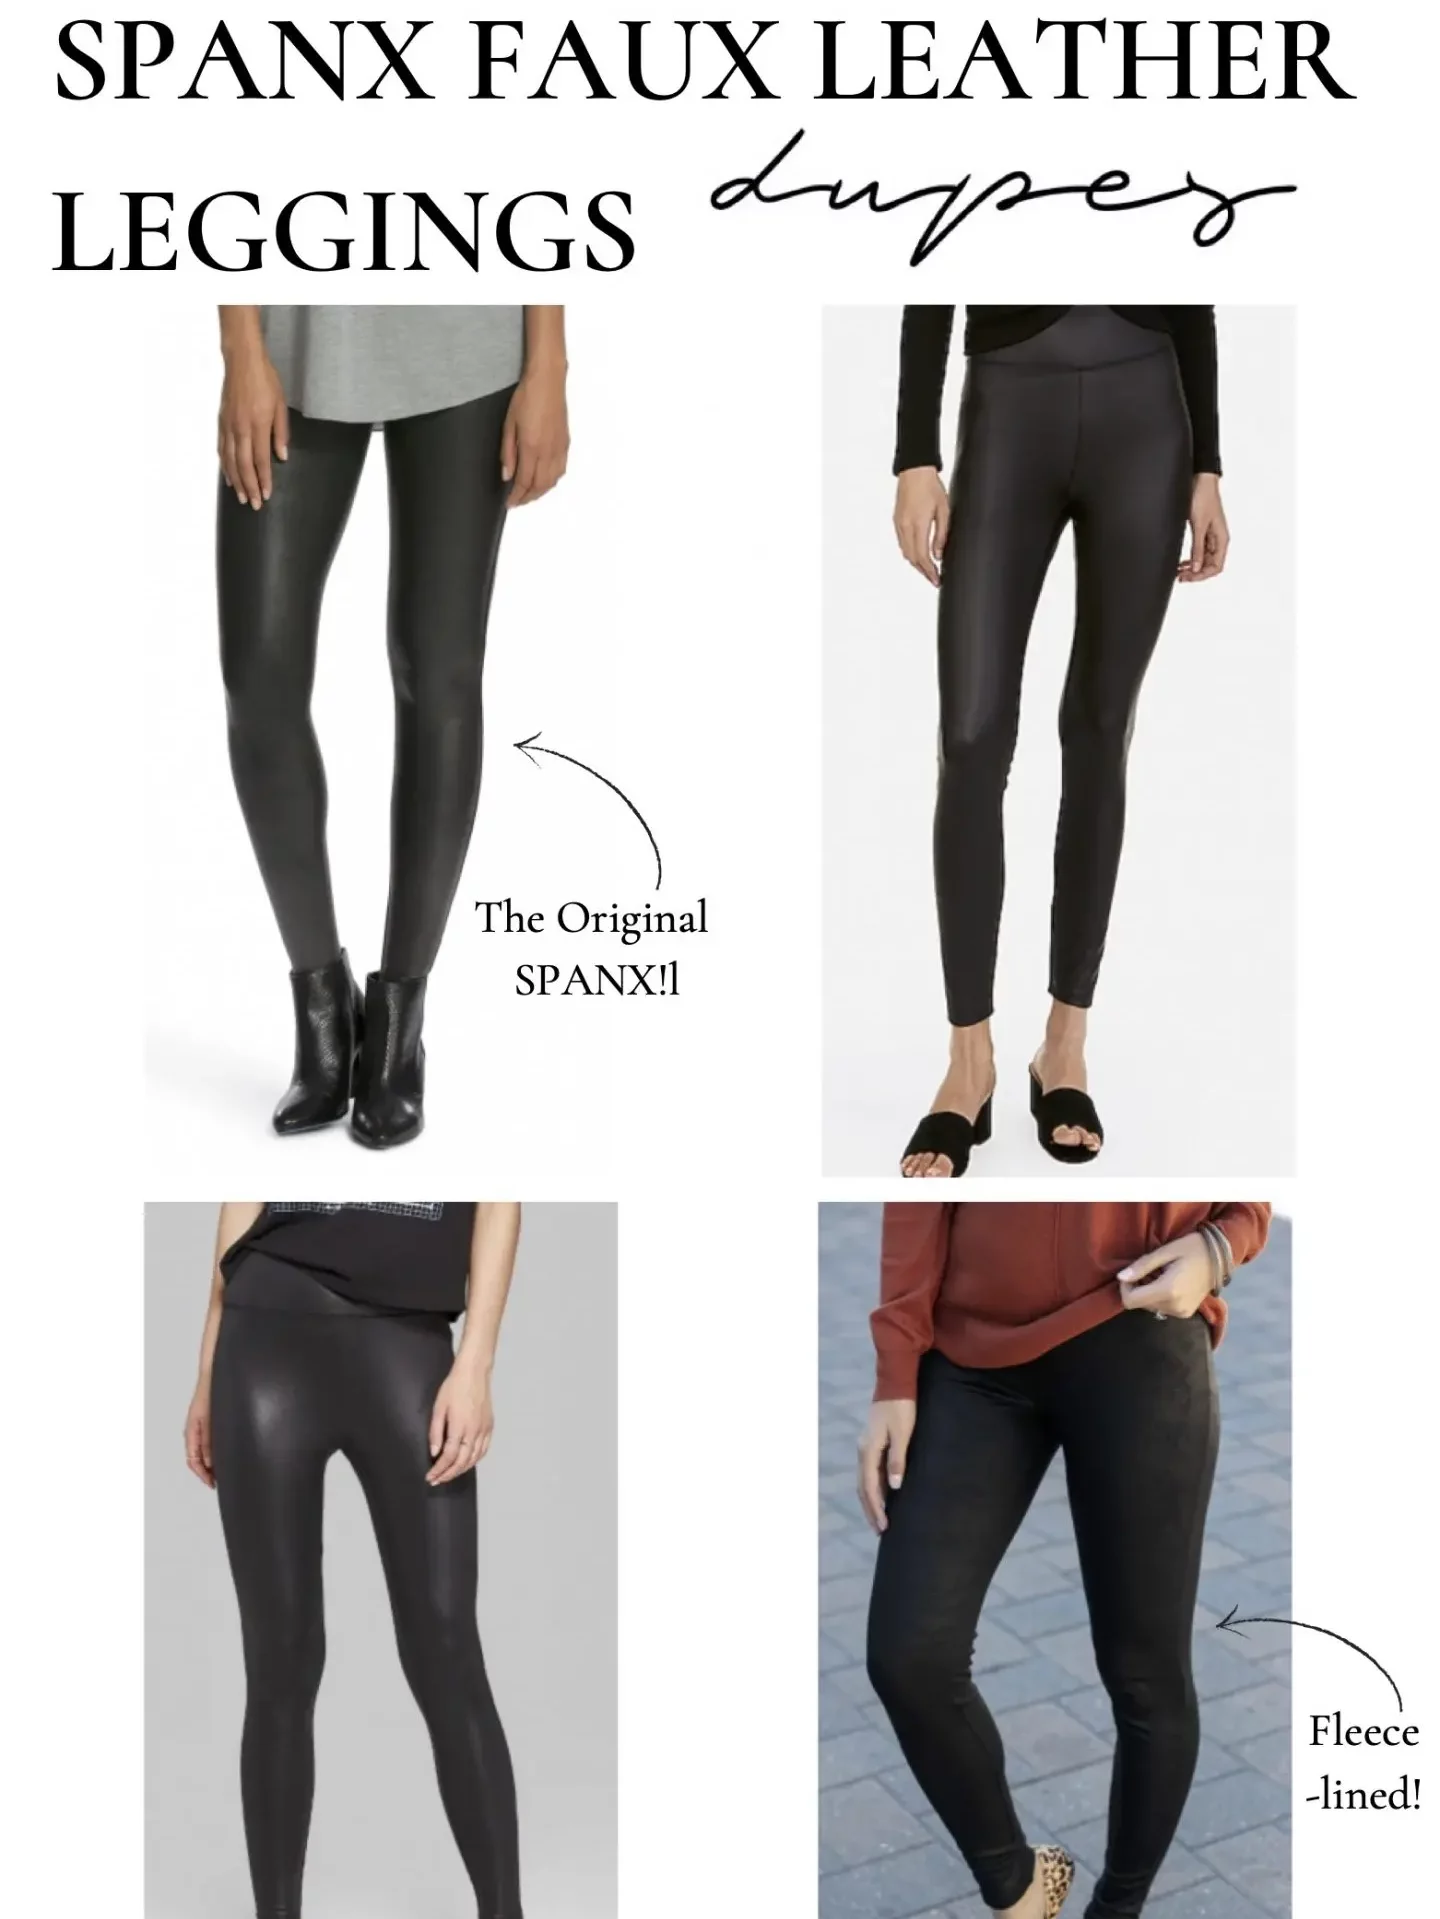 SPANX on X: For making an entrance. Introducing #Spanx clothing